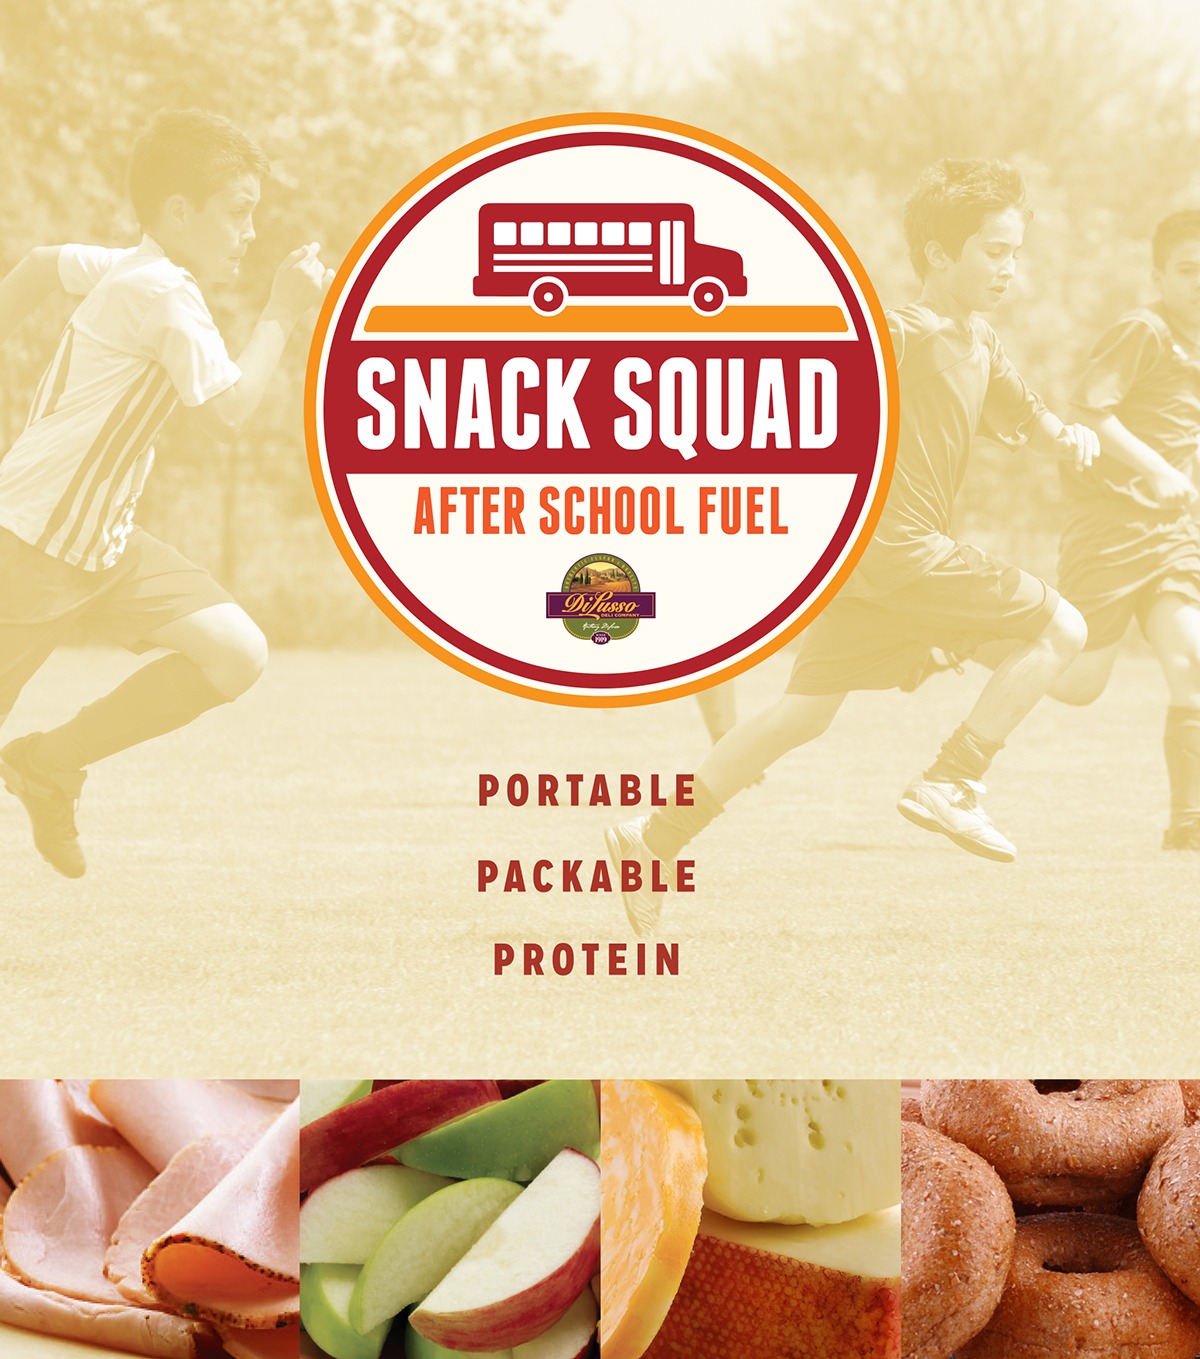 Snack Squad – After School Fuel